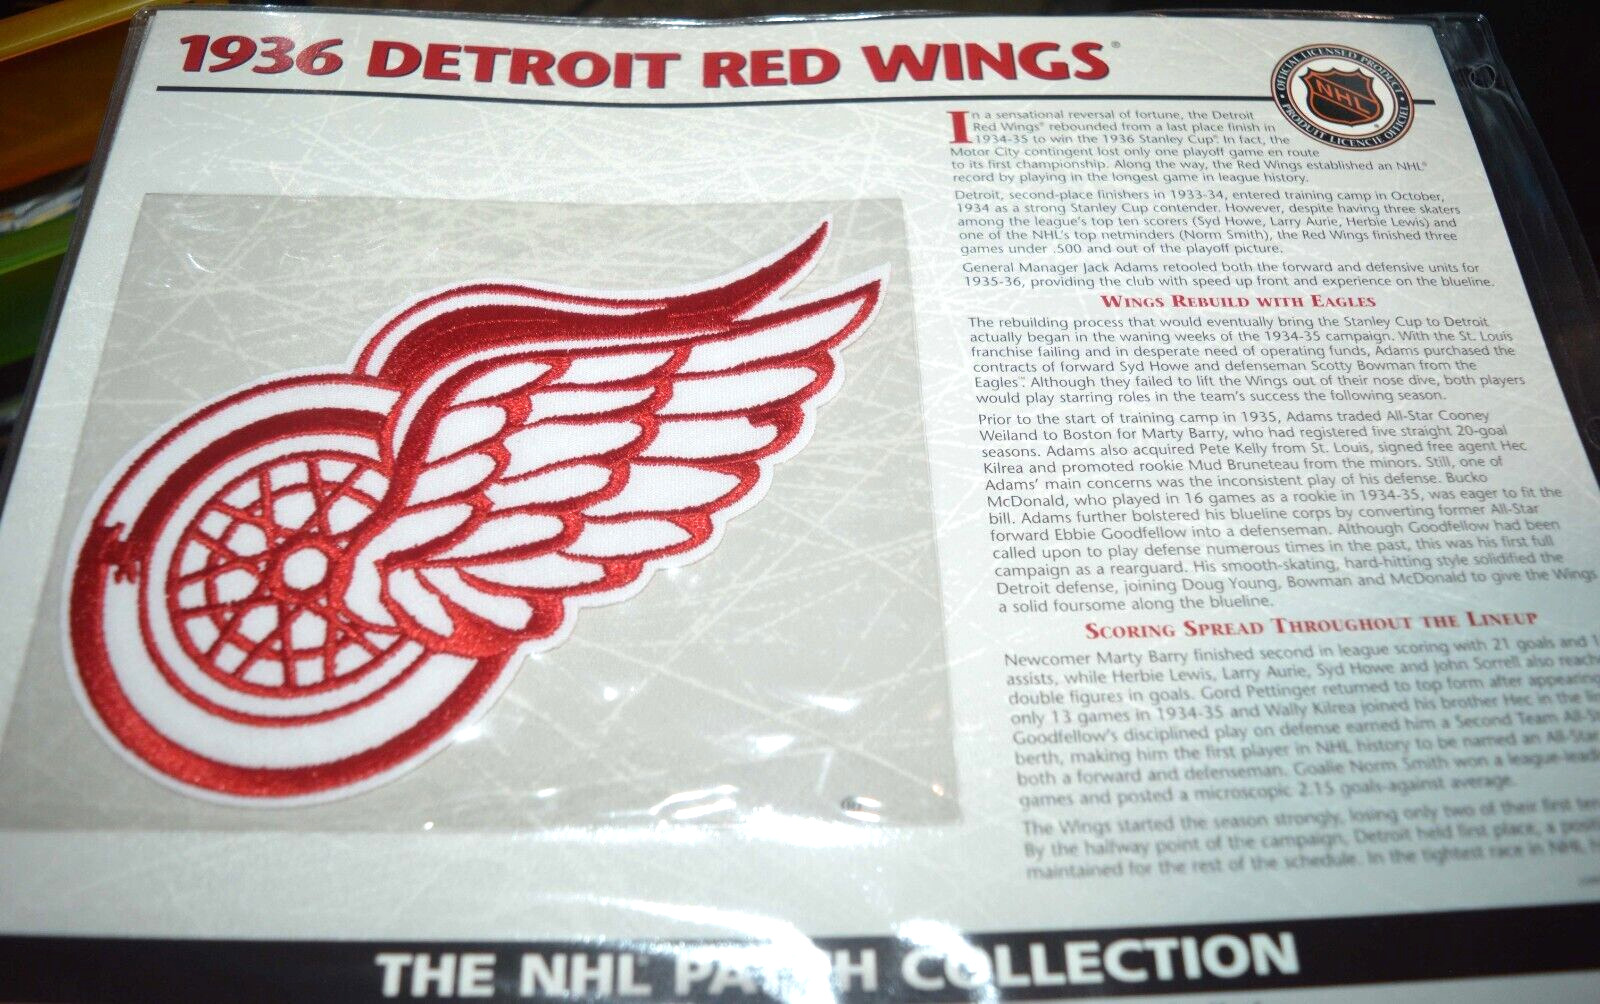 DETROIT RED WINGS 1936 LOGO NHL HOCKEY WILLABEE & WARD INFO CARD & PATCH